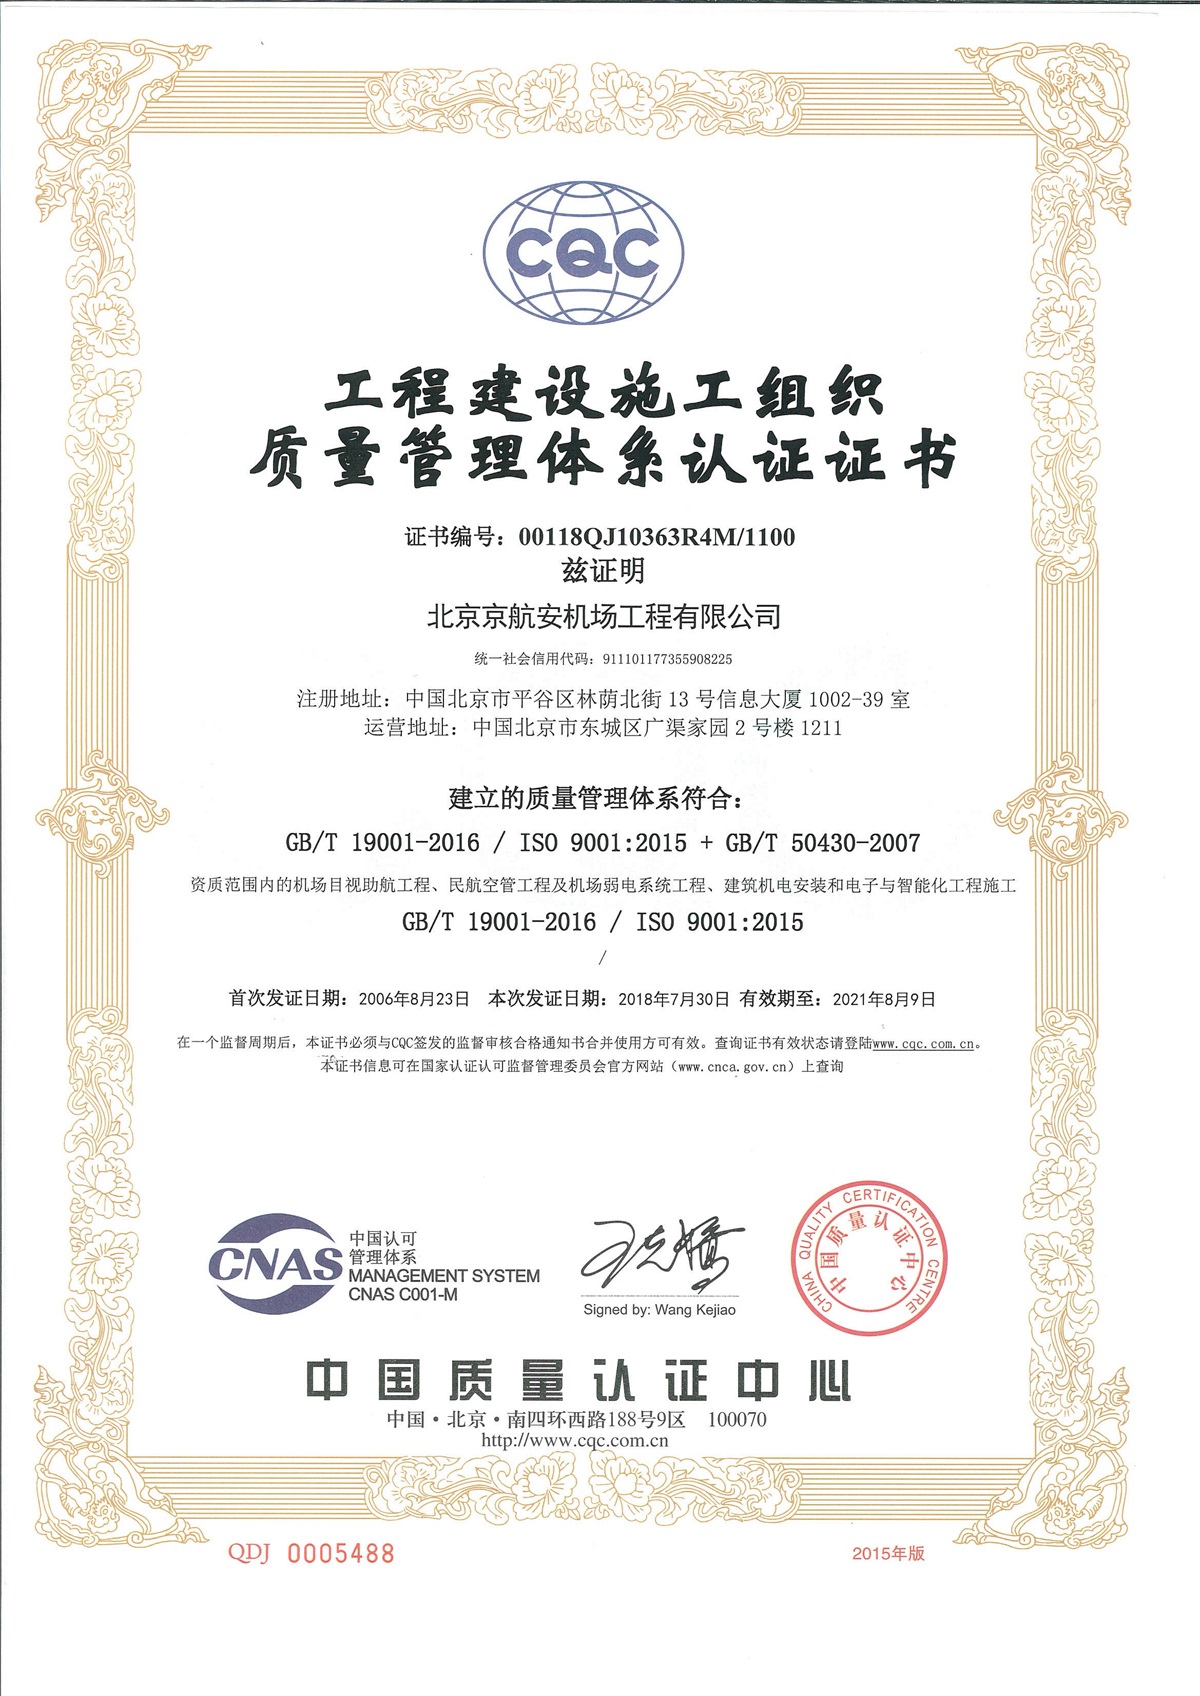 Certificate of Quality Management System of Construction Organization